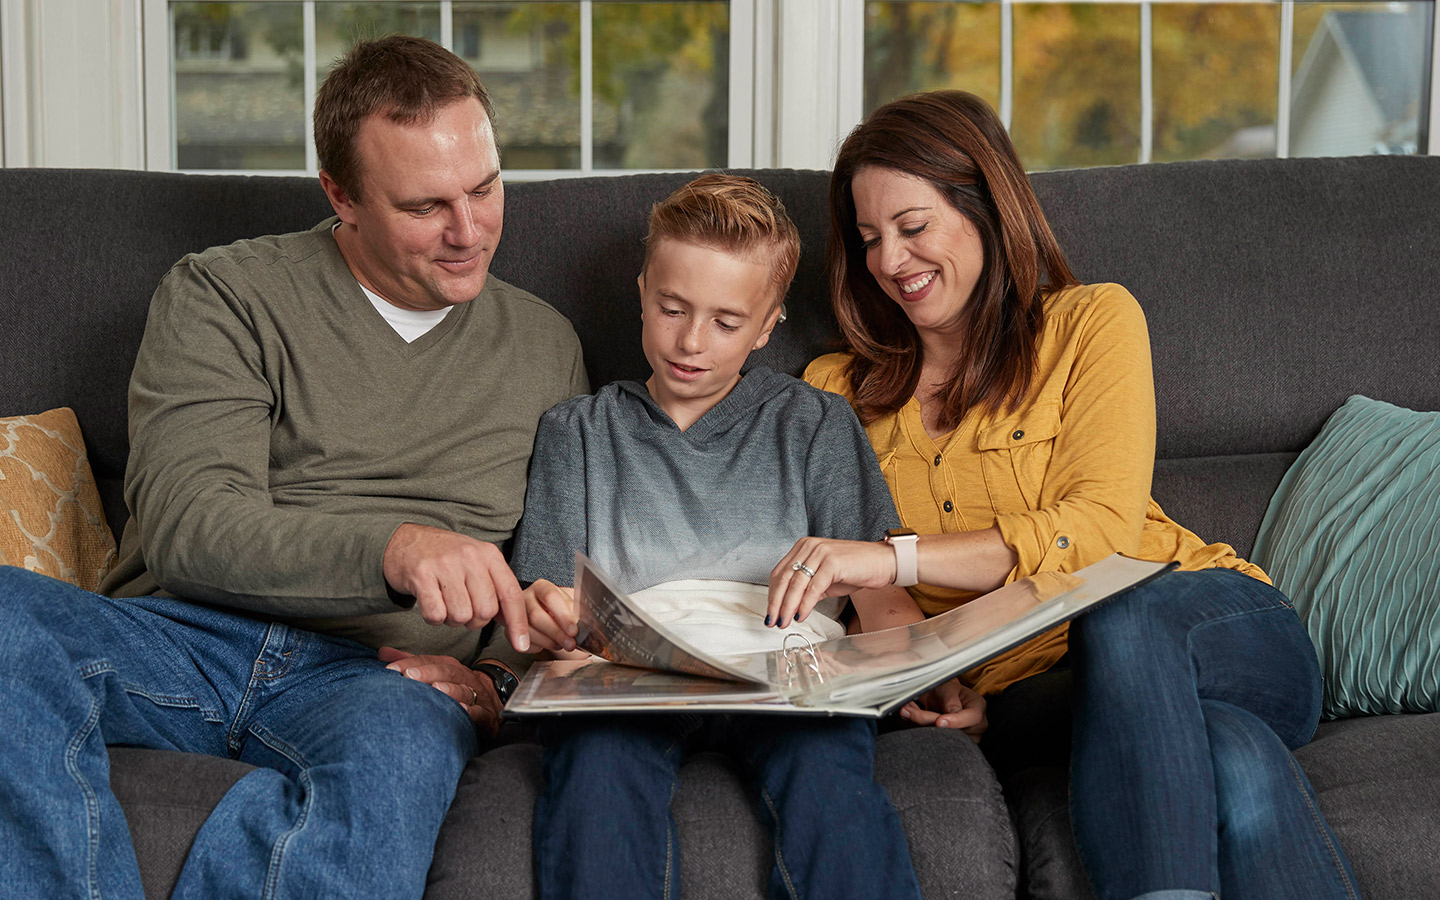 A mother and father sit on a couch with son, wearing a Cochlear implant, and listen to him read